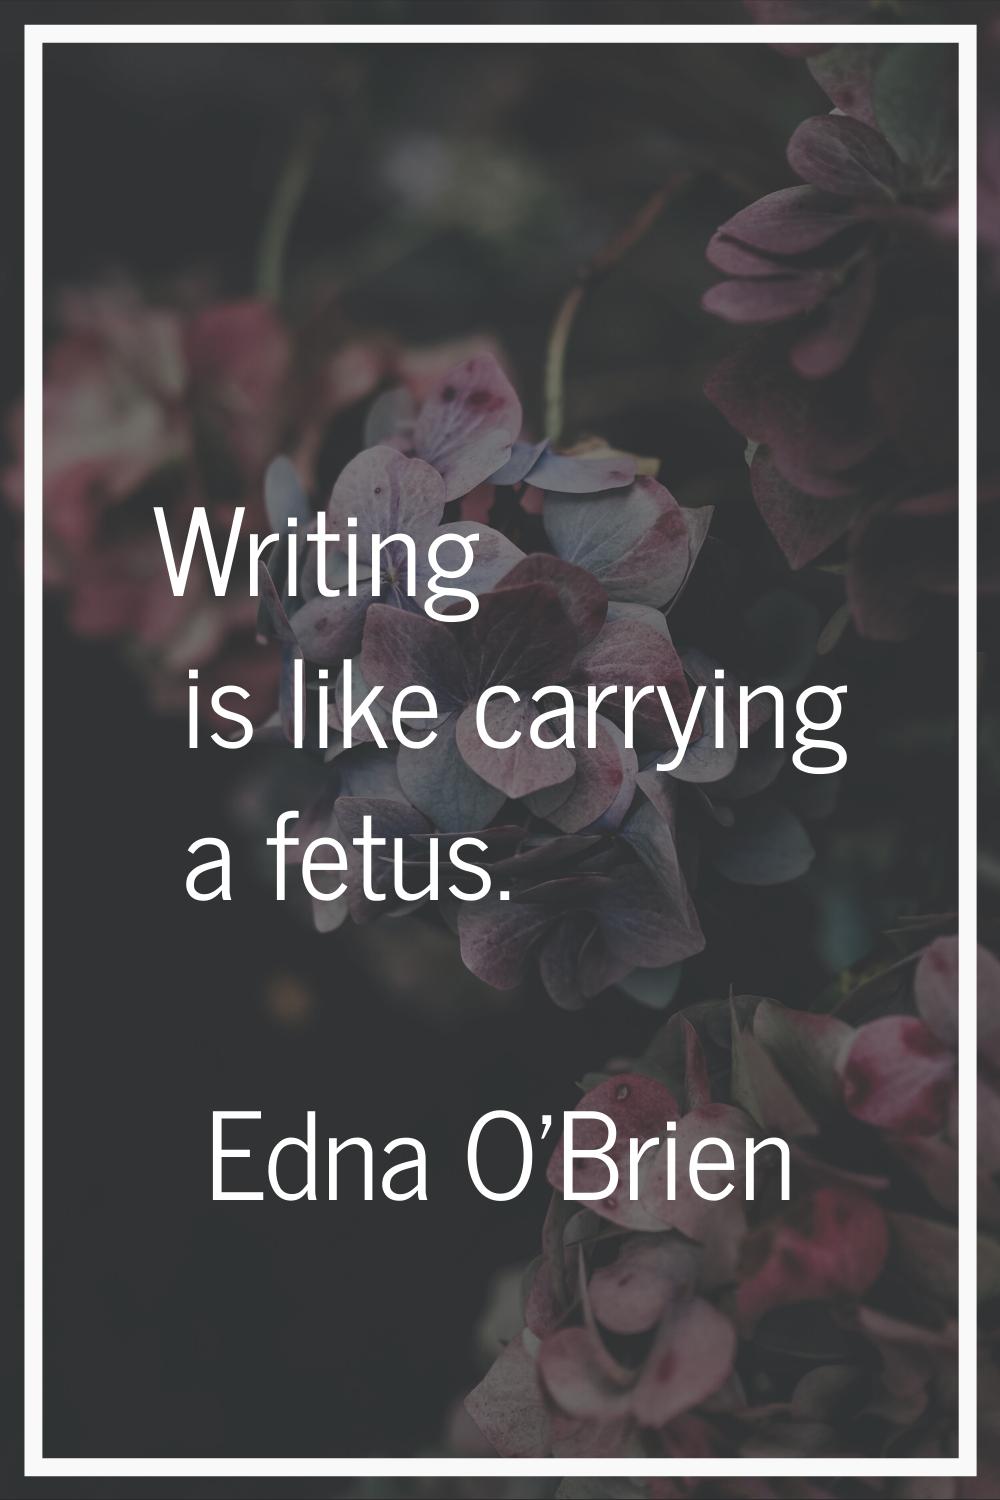 Writing is like carrying a fetus.